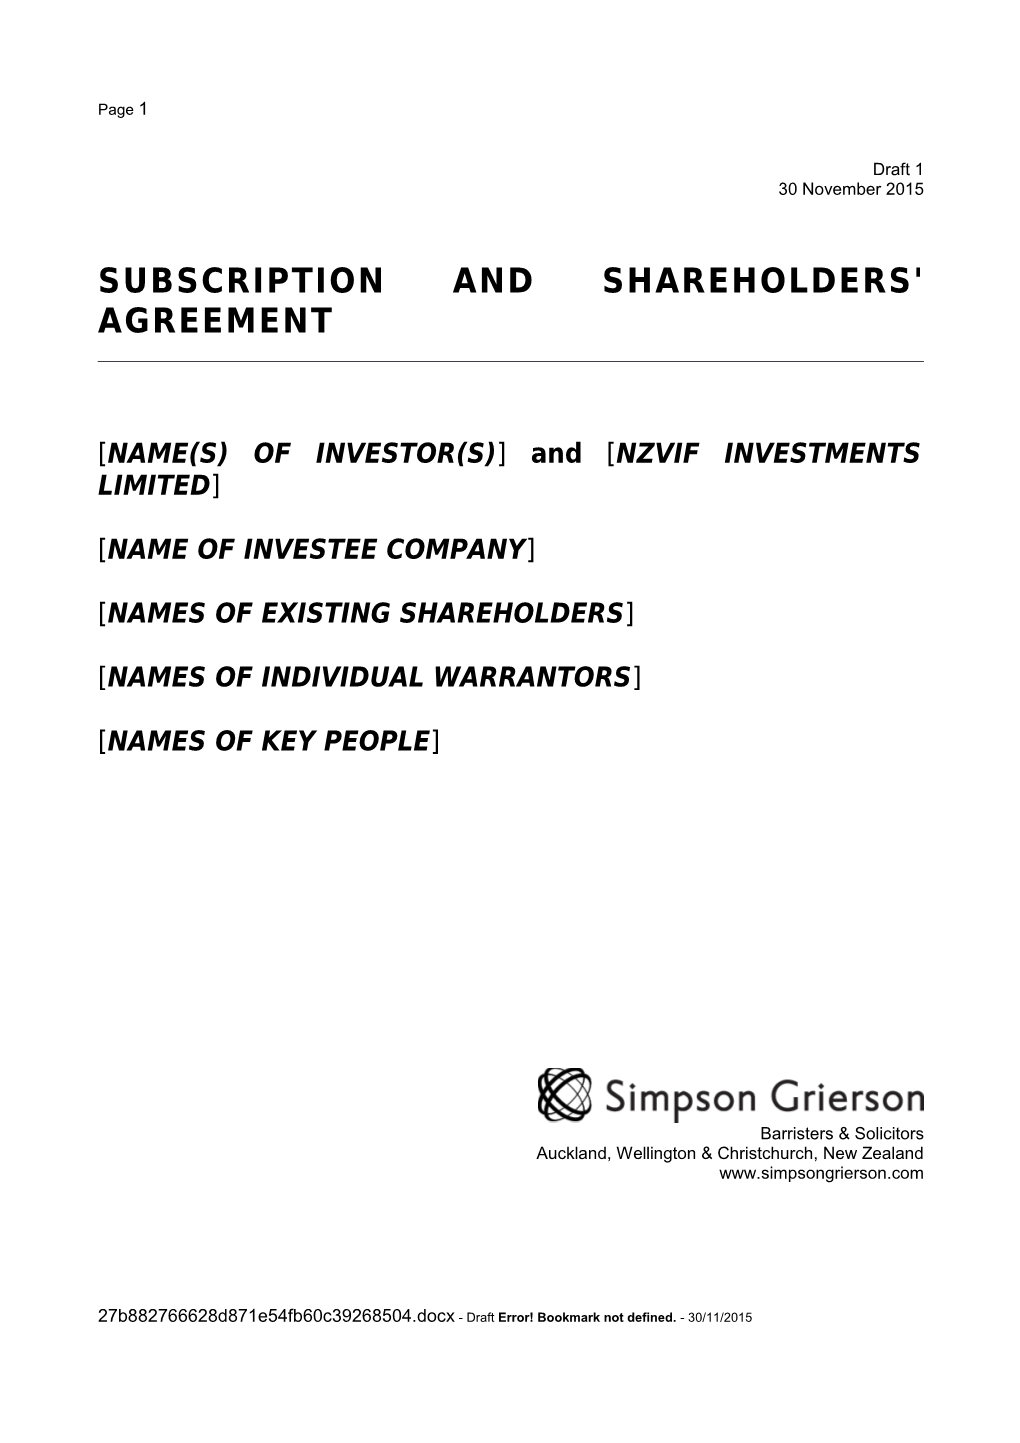 Subscription and Shareholders' Agreement